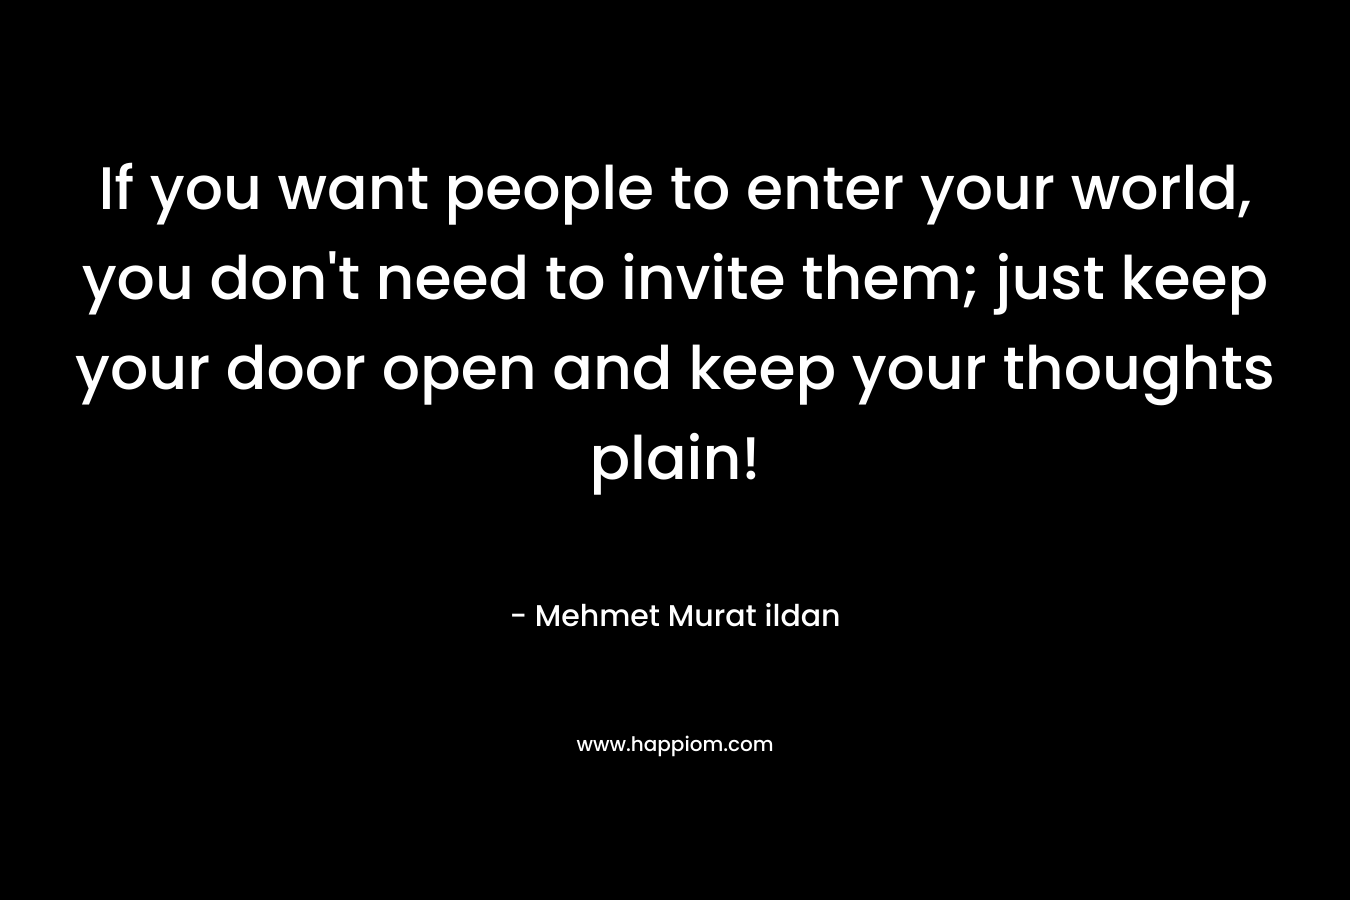 If you want people to enter your world, you don't need to invite them; just keep your door open and keep your thoughts plain!